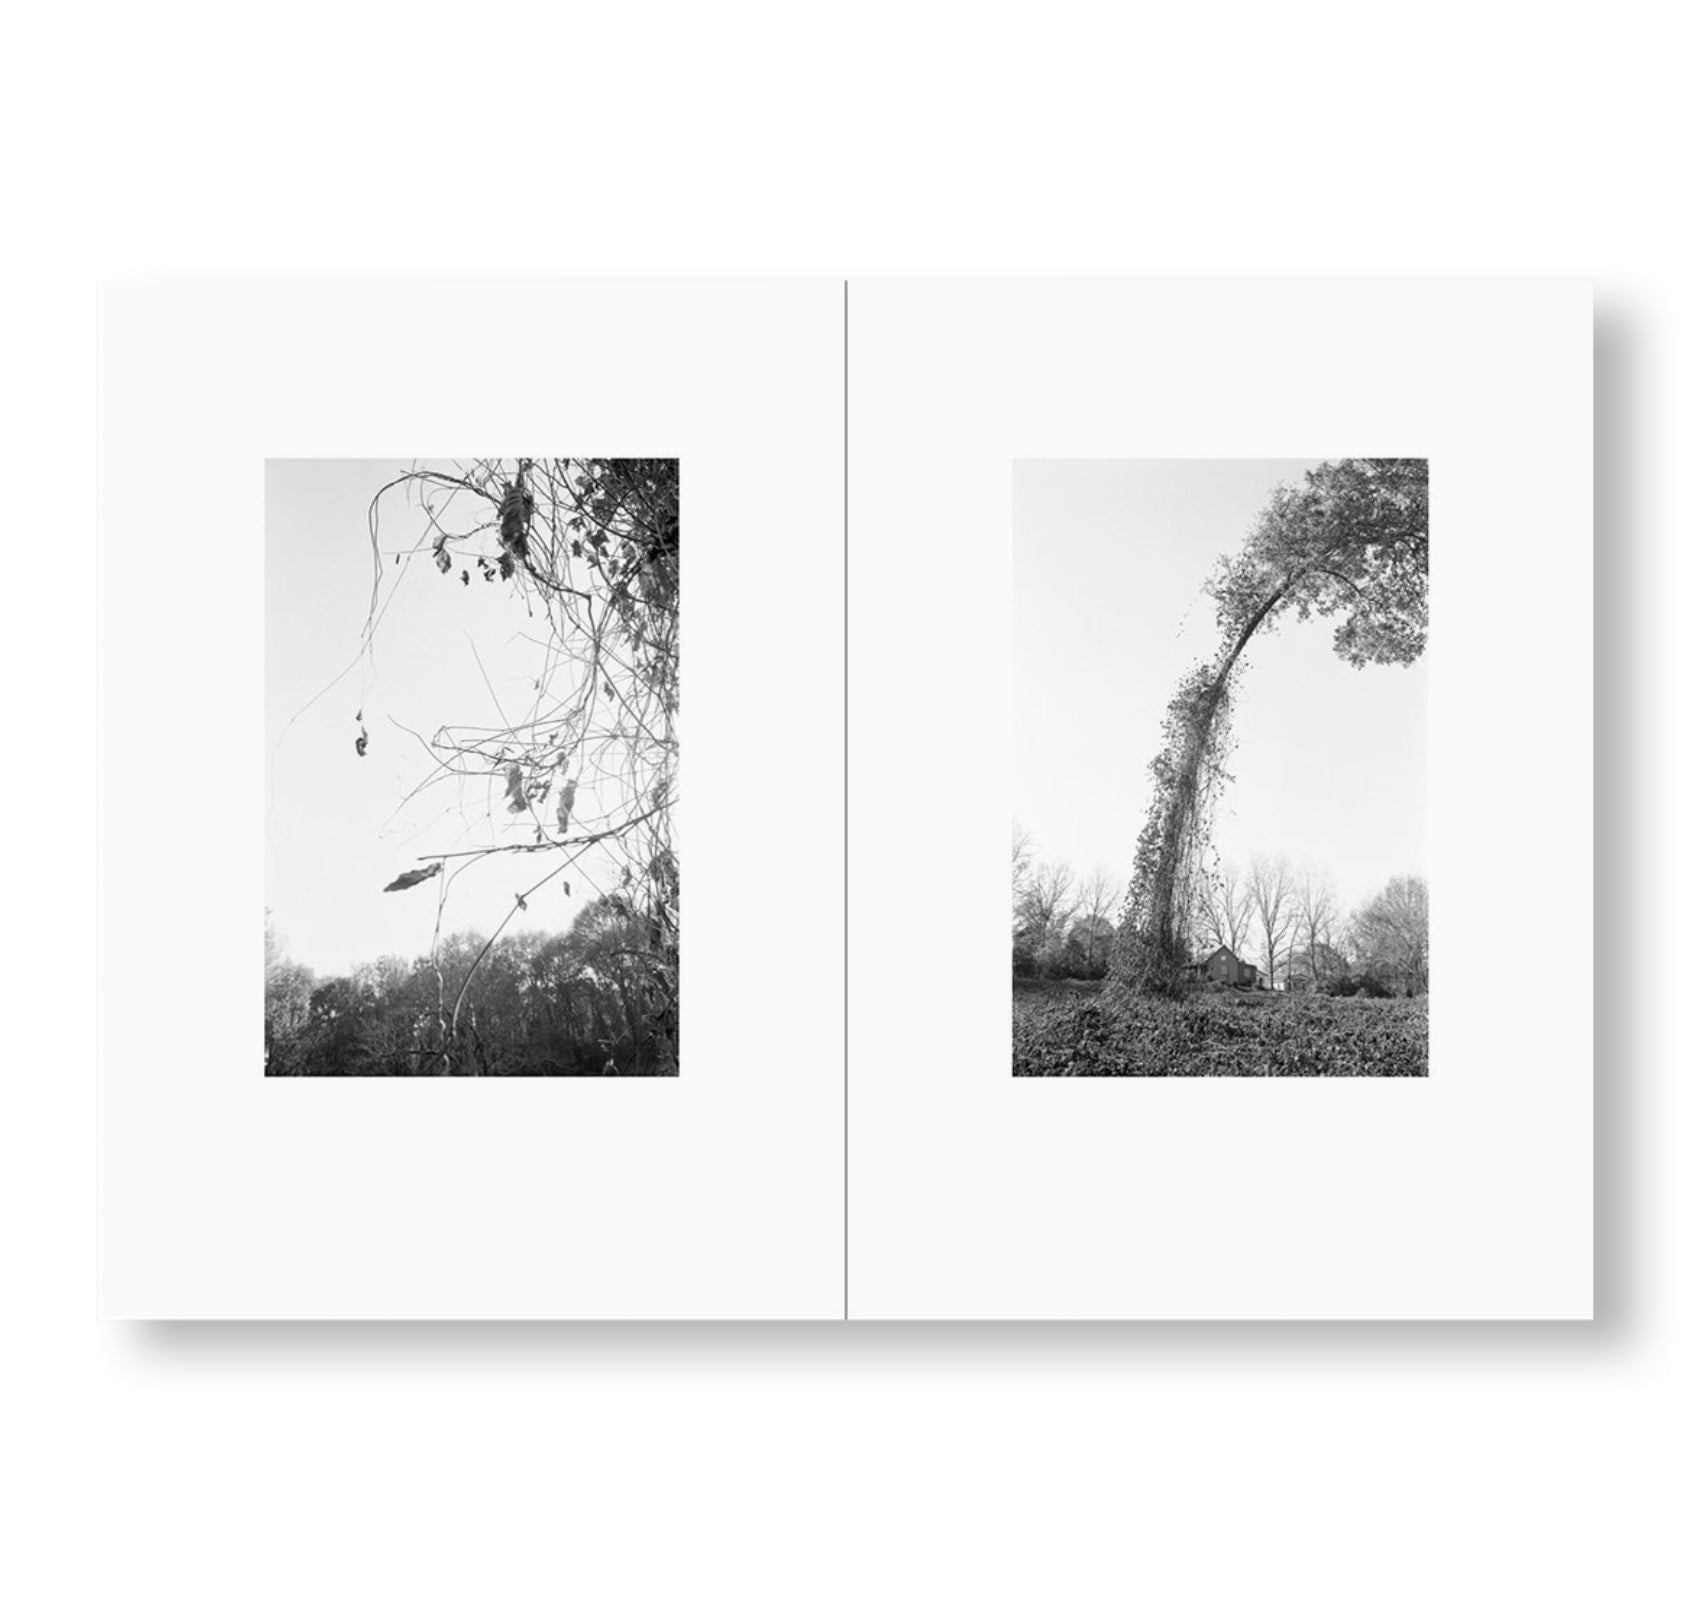 ONE PICTURE BOOK TWO #32: BENT TREE by Mark Steinmetz [SPECIAL EDITION]